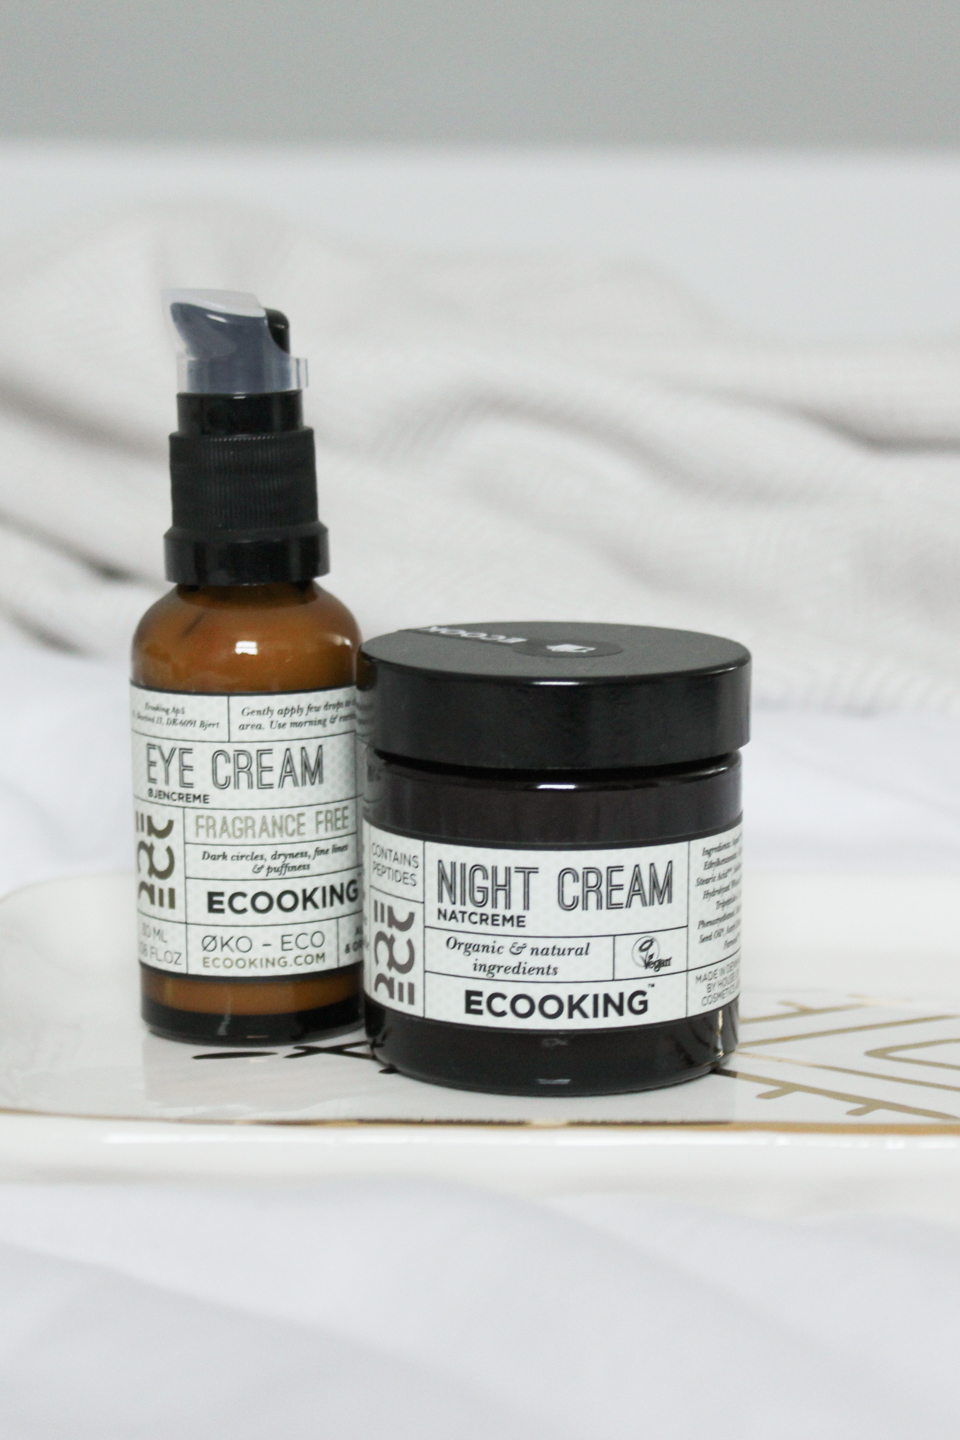 Two Ecooking skincare products